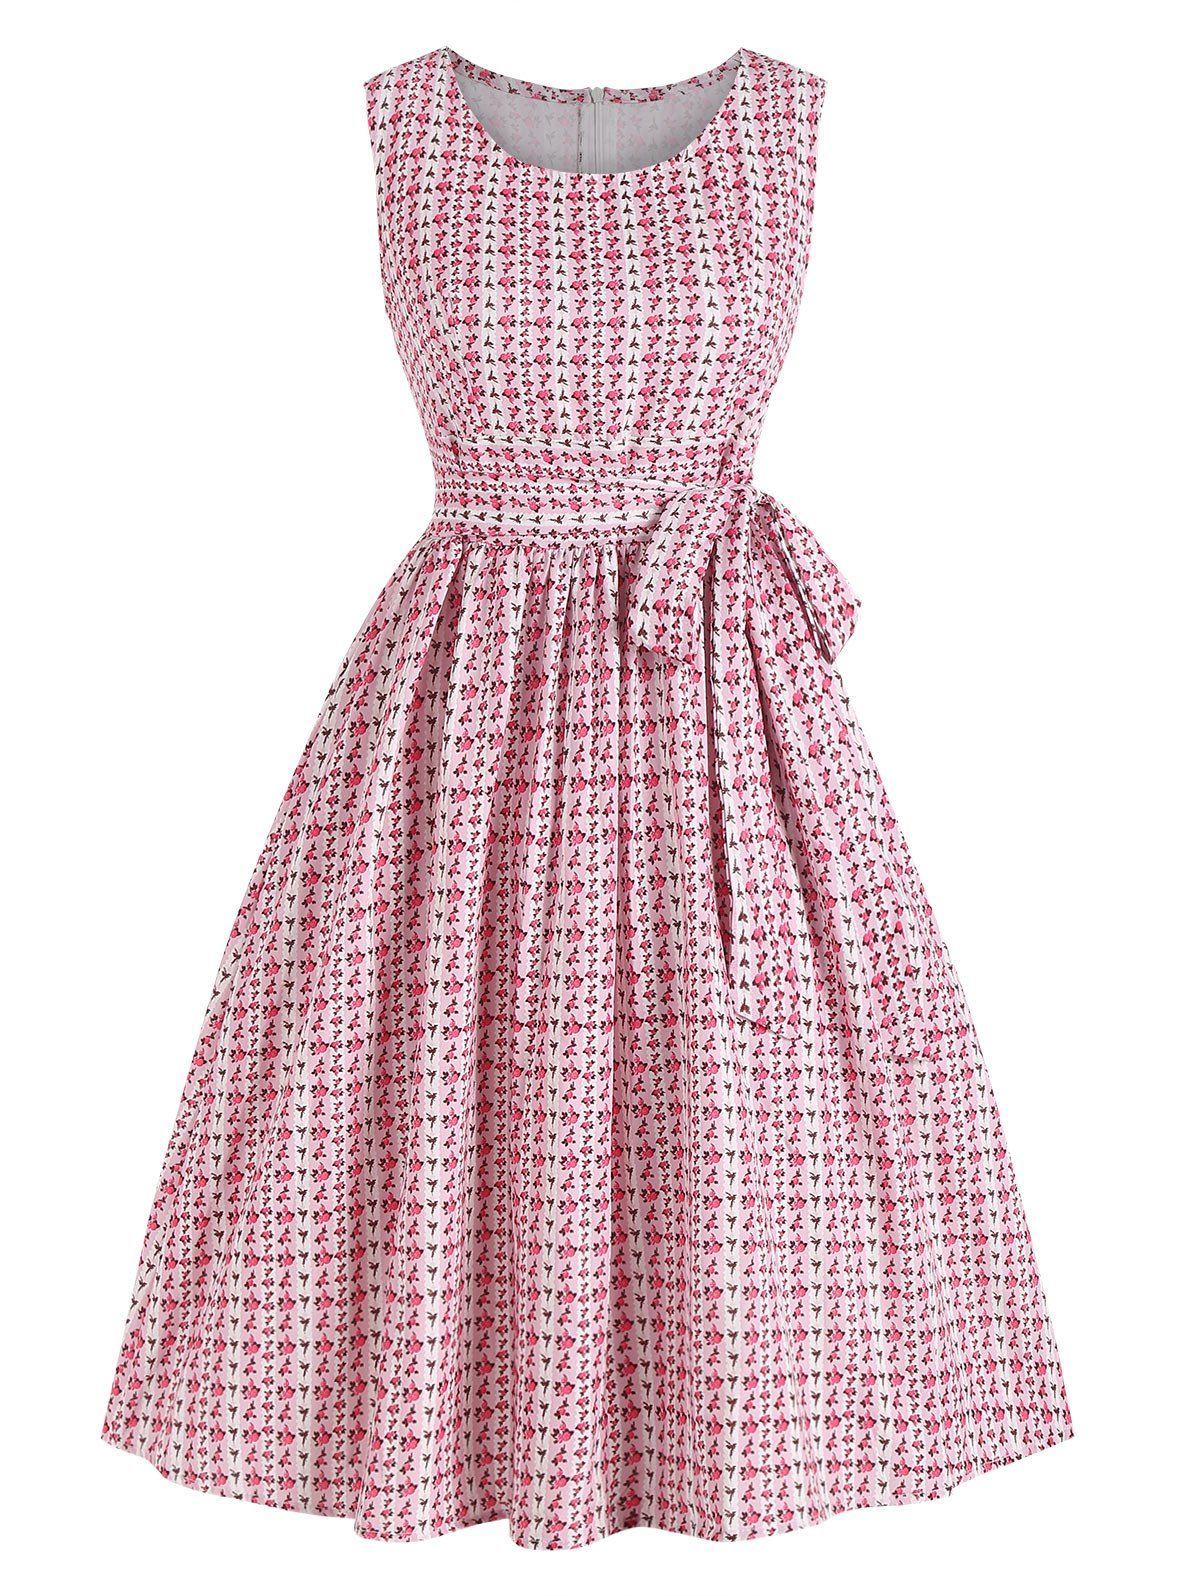 Belted Sleeveless Ditsy Floral Swing Dress - LIGHT PINK M